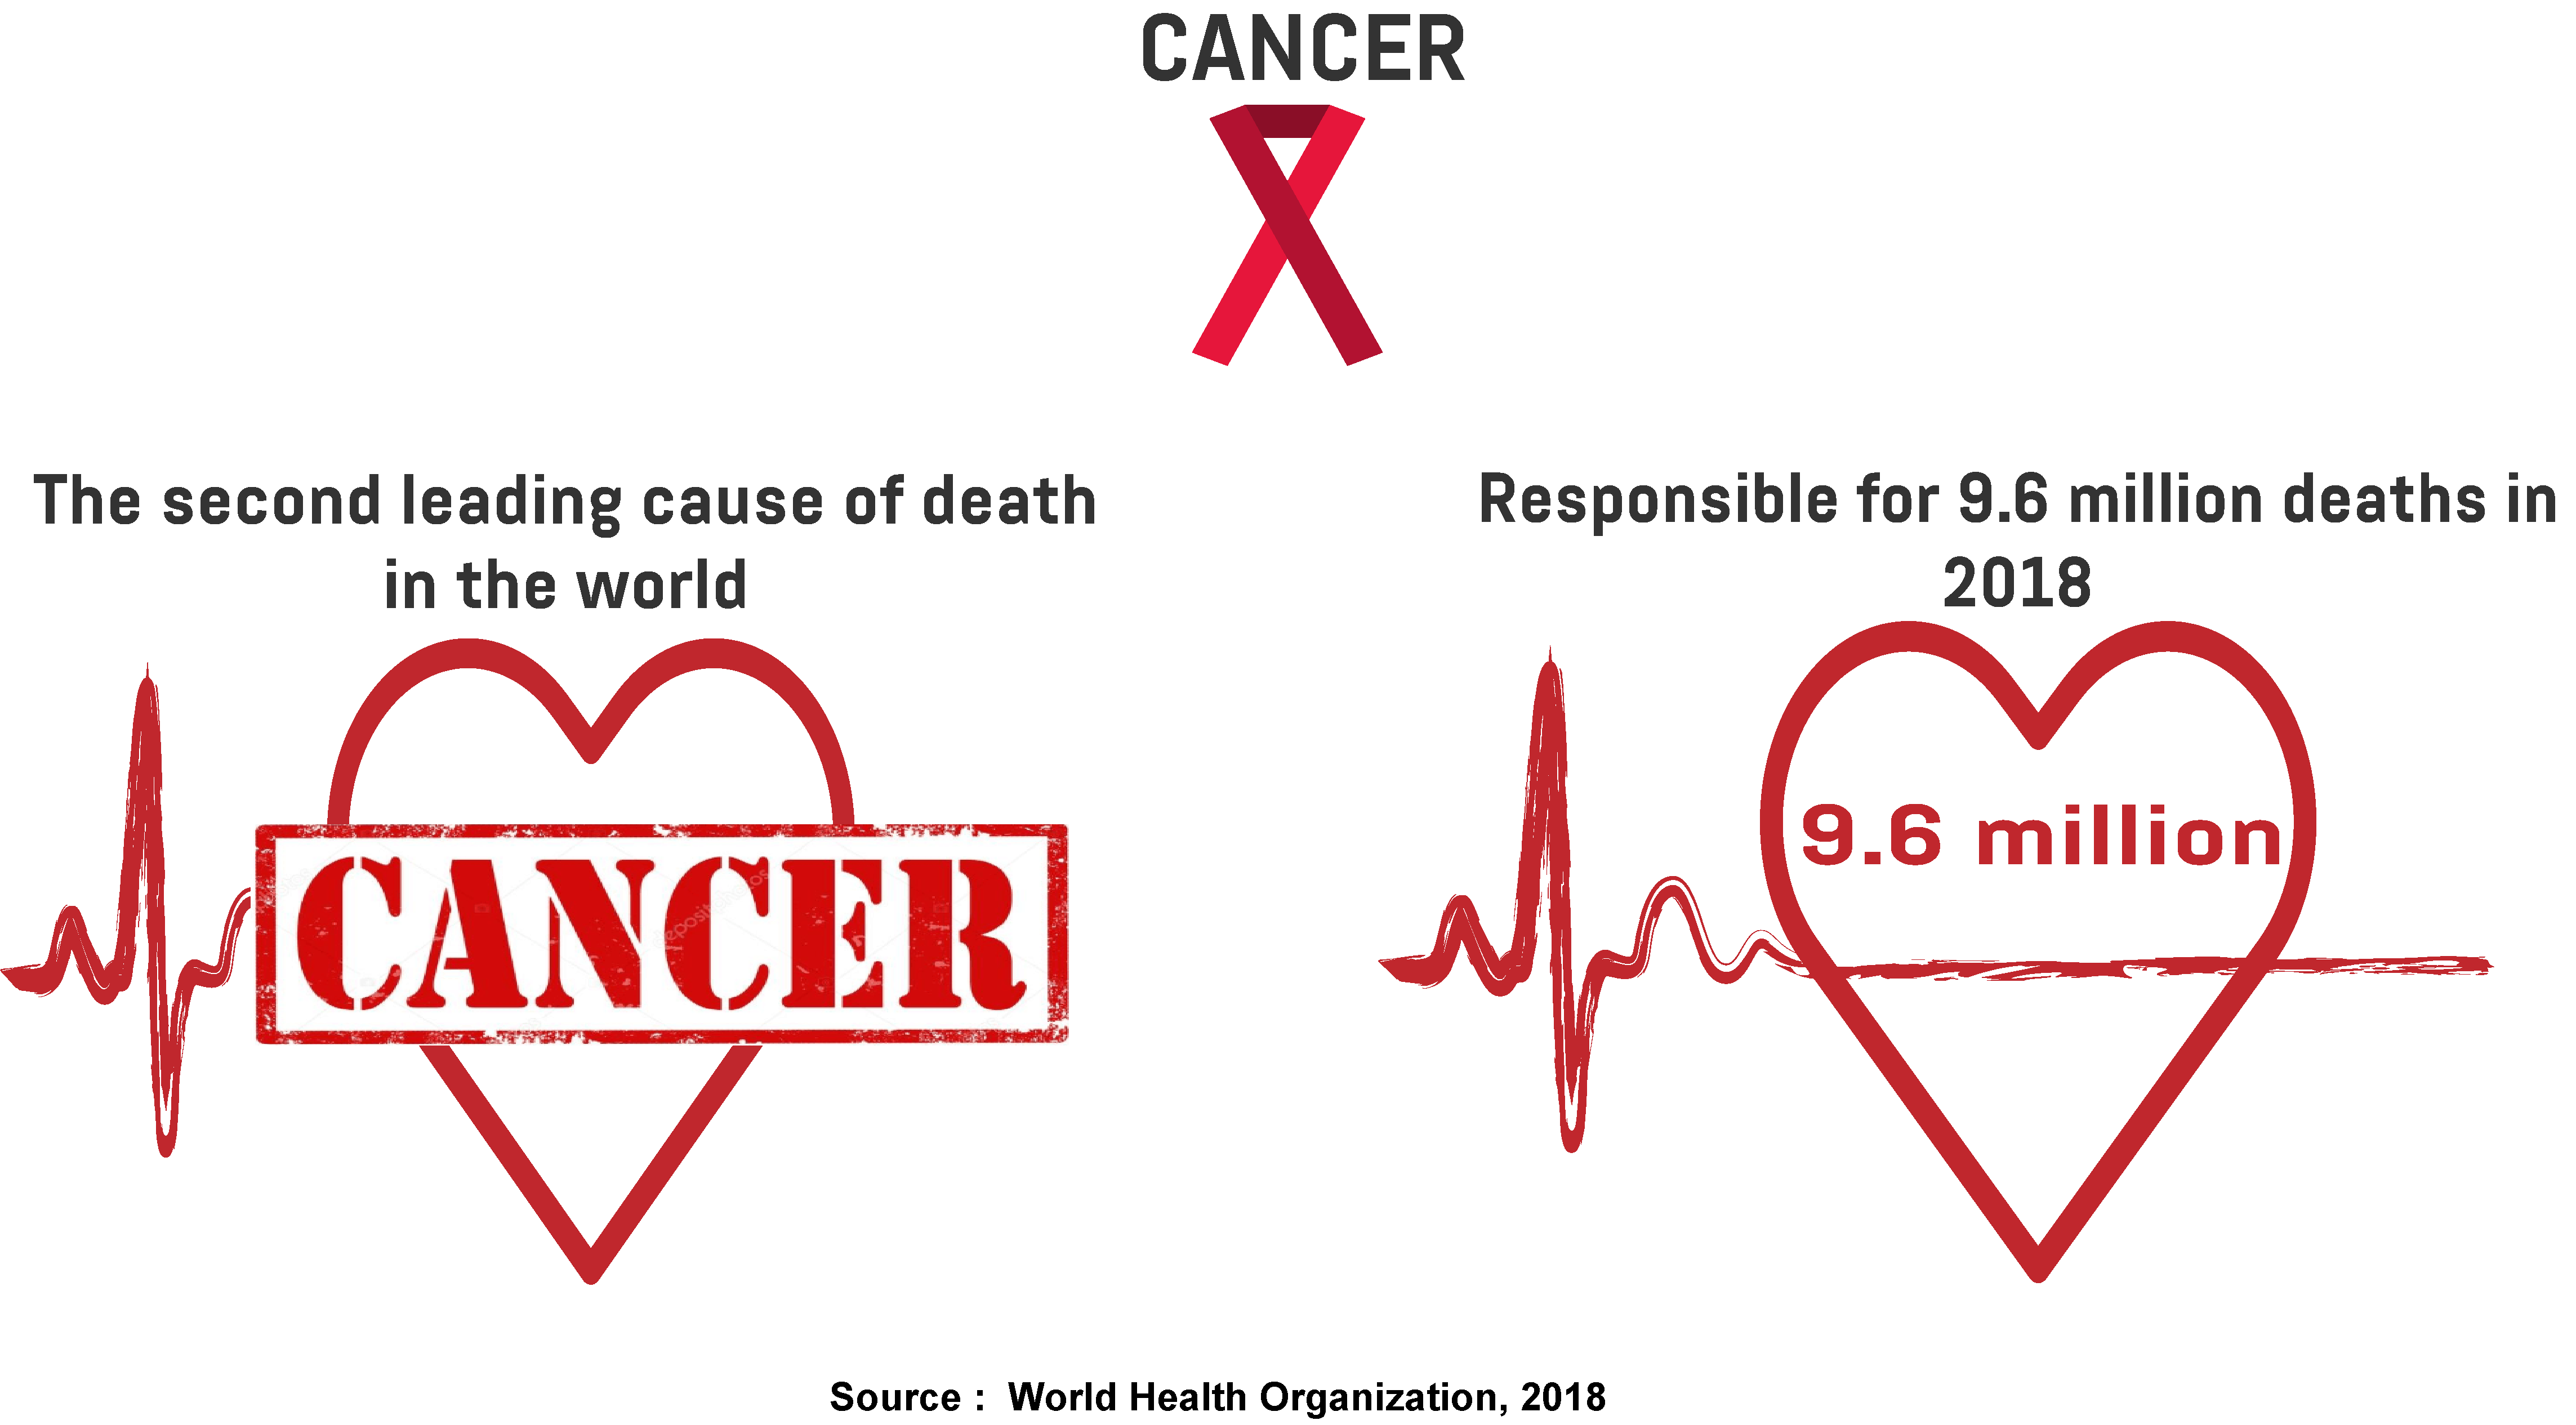 Infographic showing the World Health Organization’s statistics on cancer.